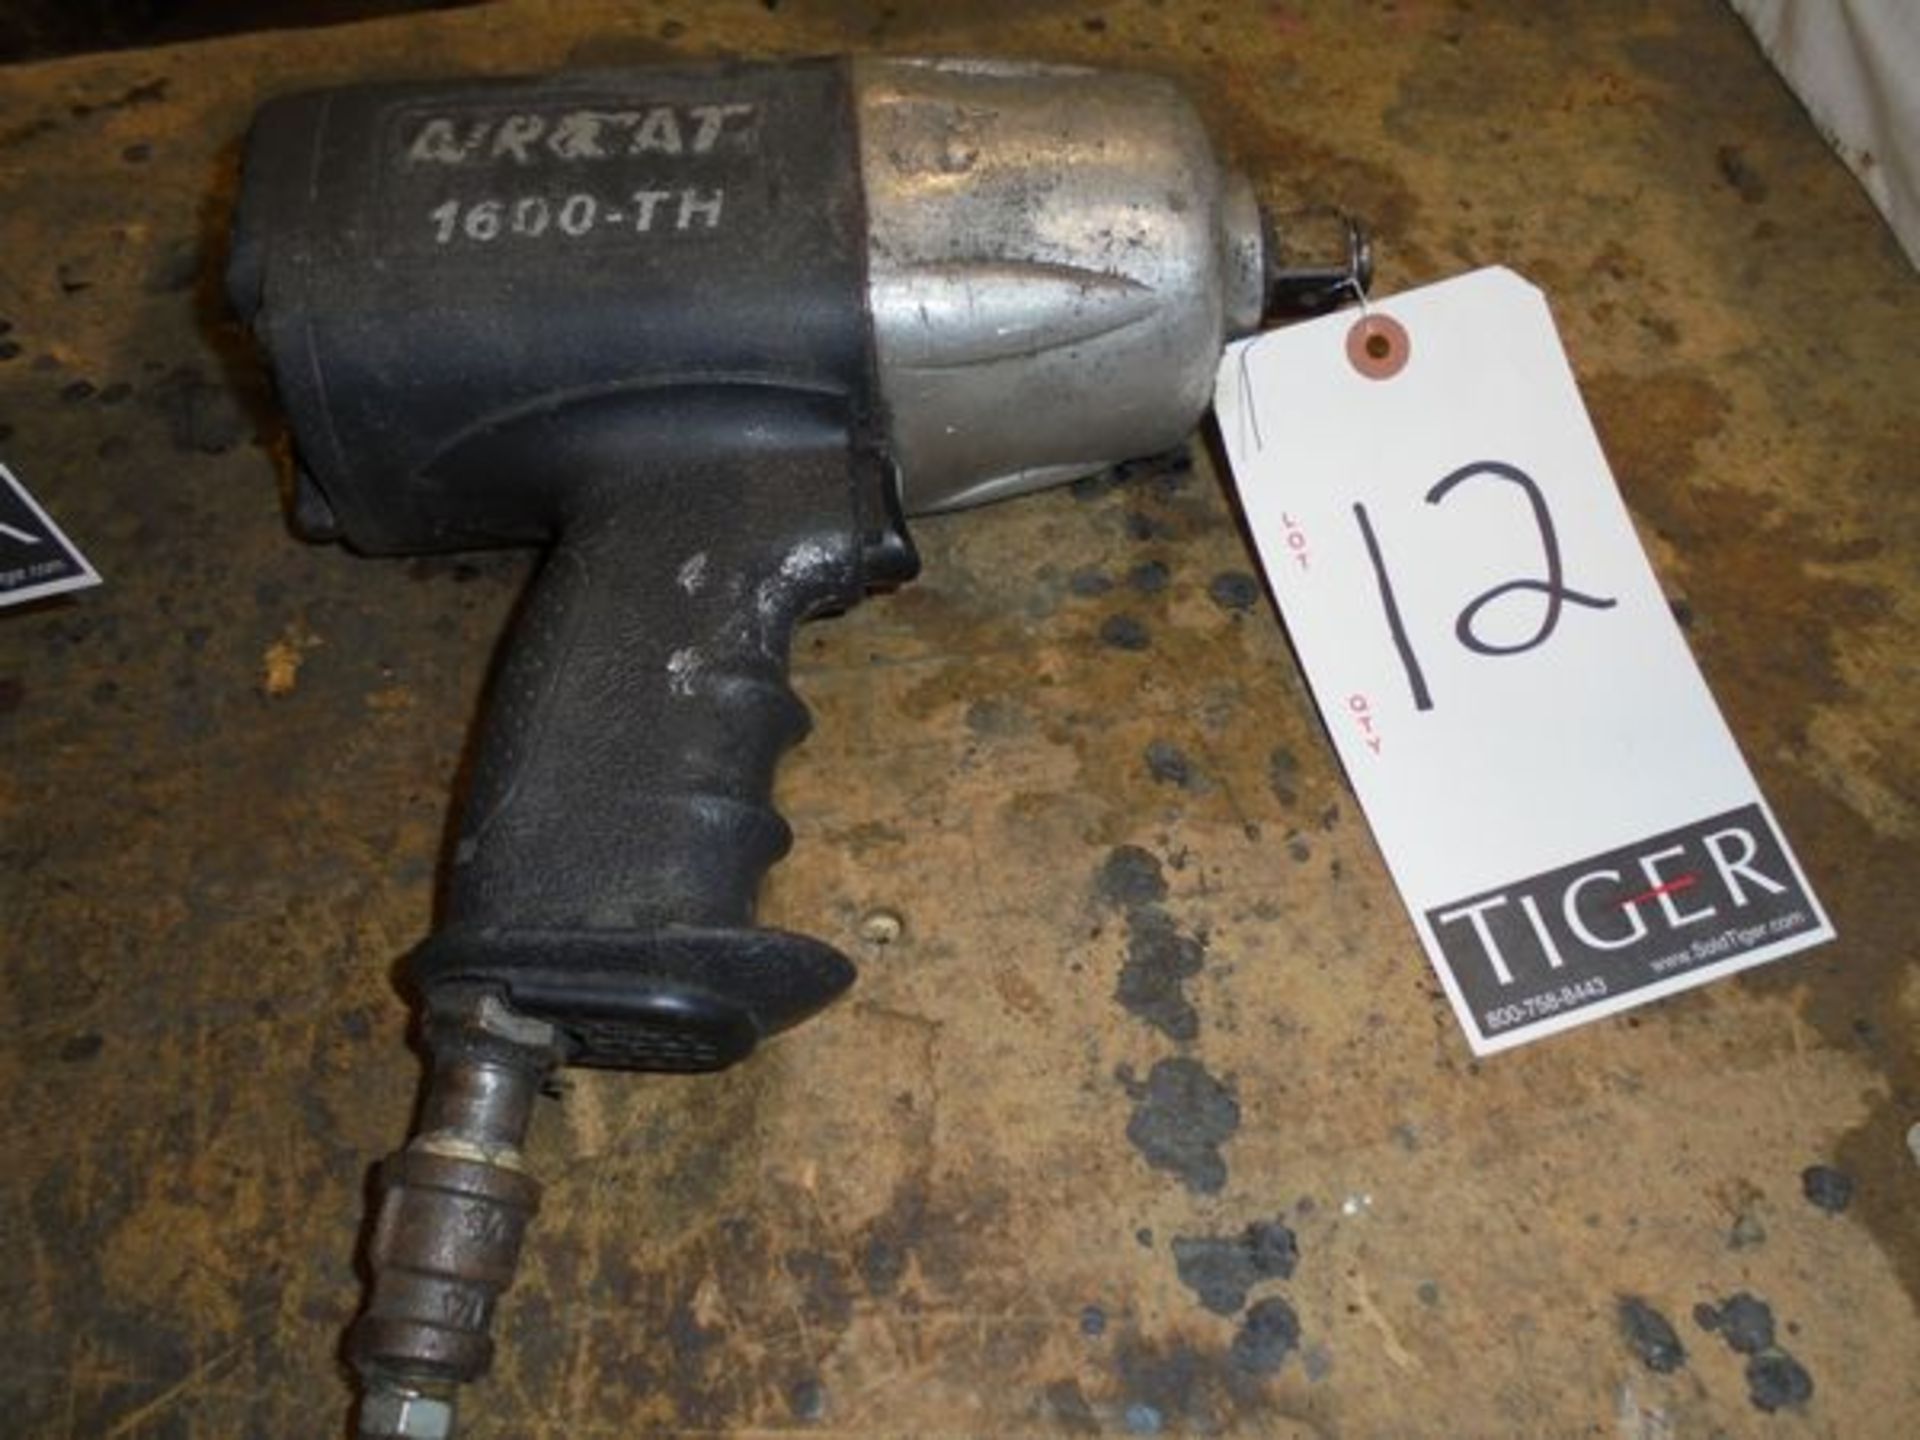 Air Cat 1600-TH Pneumatic Drill - Site Location: Bluffton, IN